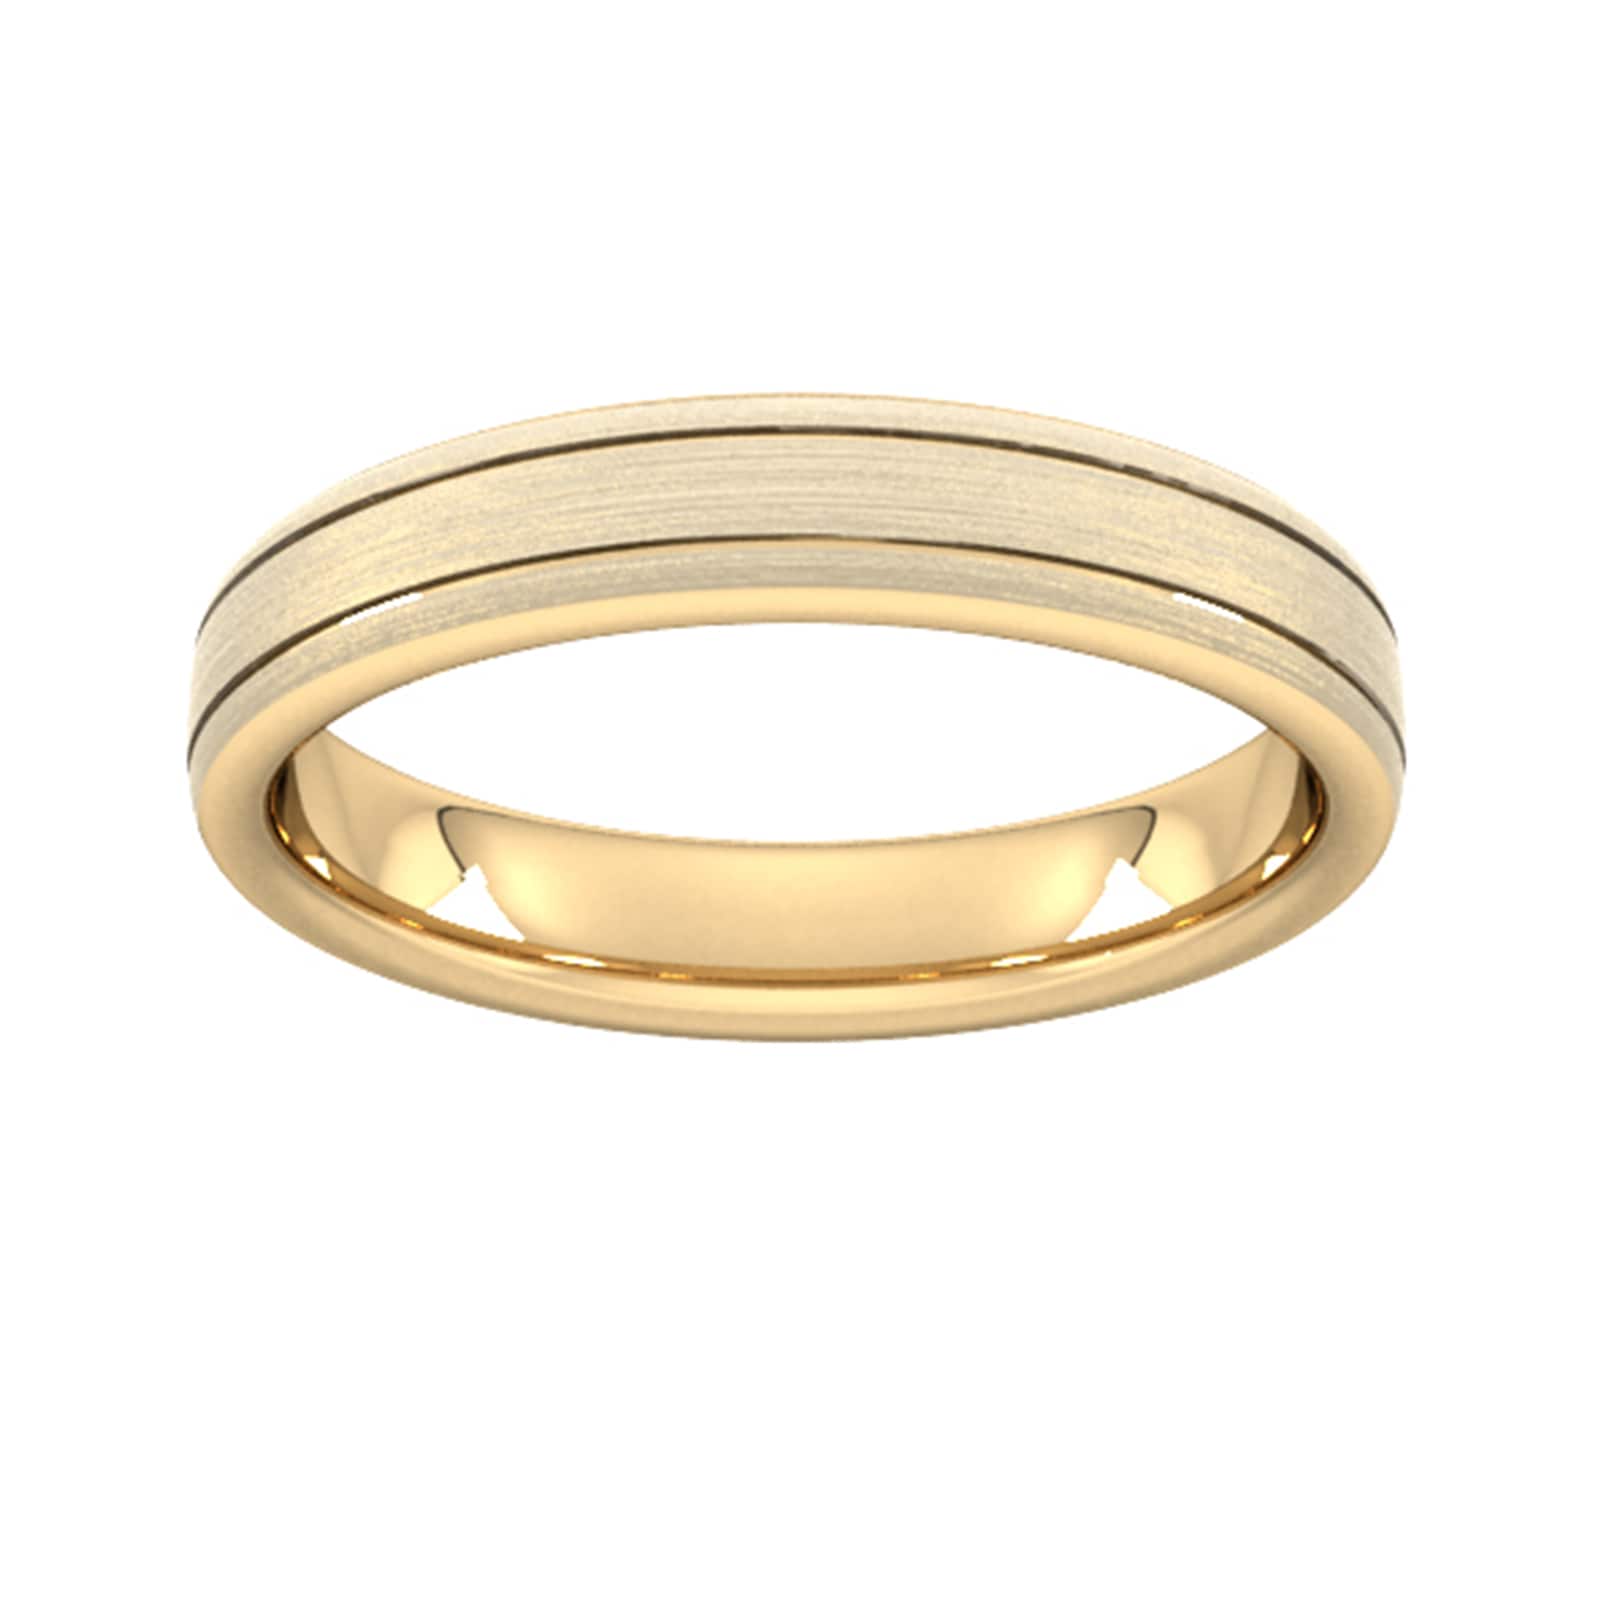 4mm Slight Court Standard Matt Finish With Double Grooves Wedding Ring In 9 Carat Yellow Gold - Ring Size G